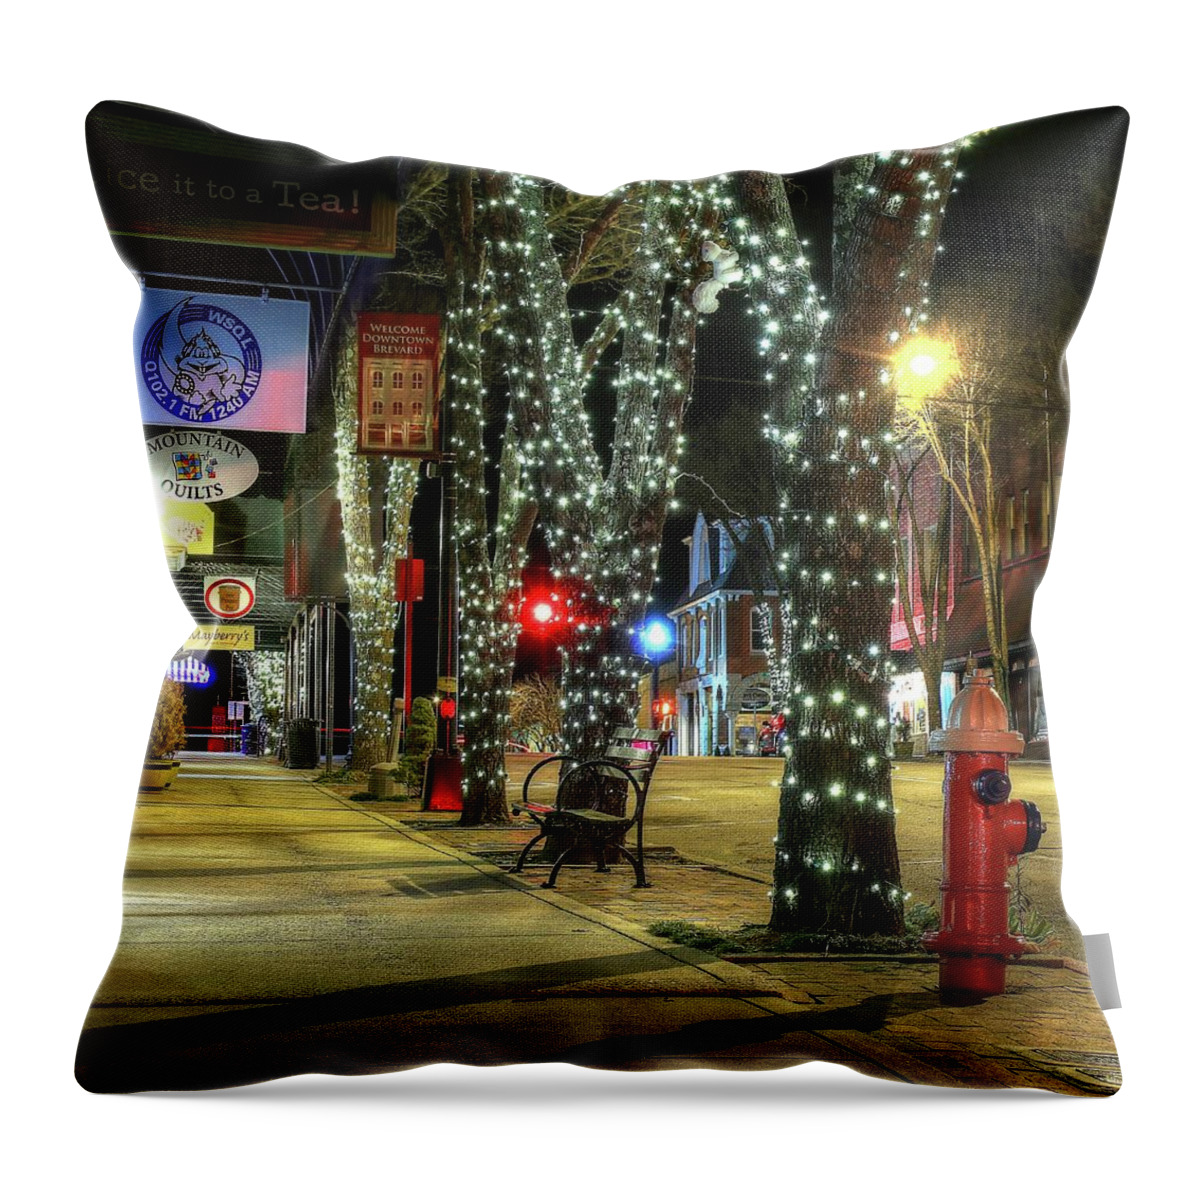 Tripping The Light In Downtown Brevard North Carolina Throw Pillow featuring the photograph Tripping The Light In Downtown Brevard North Carolina by Carol Montoya